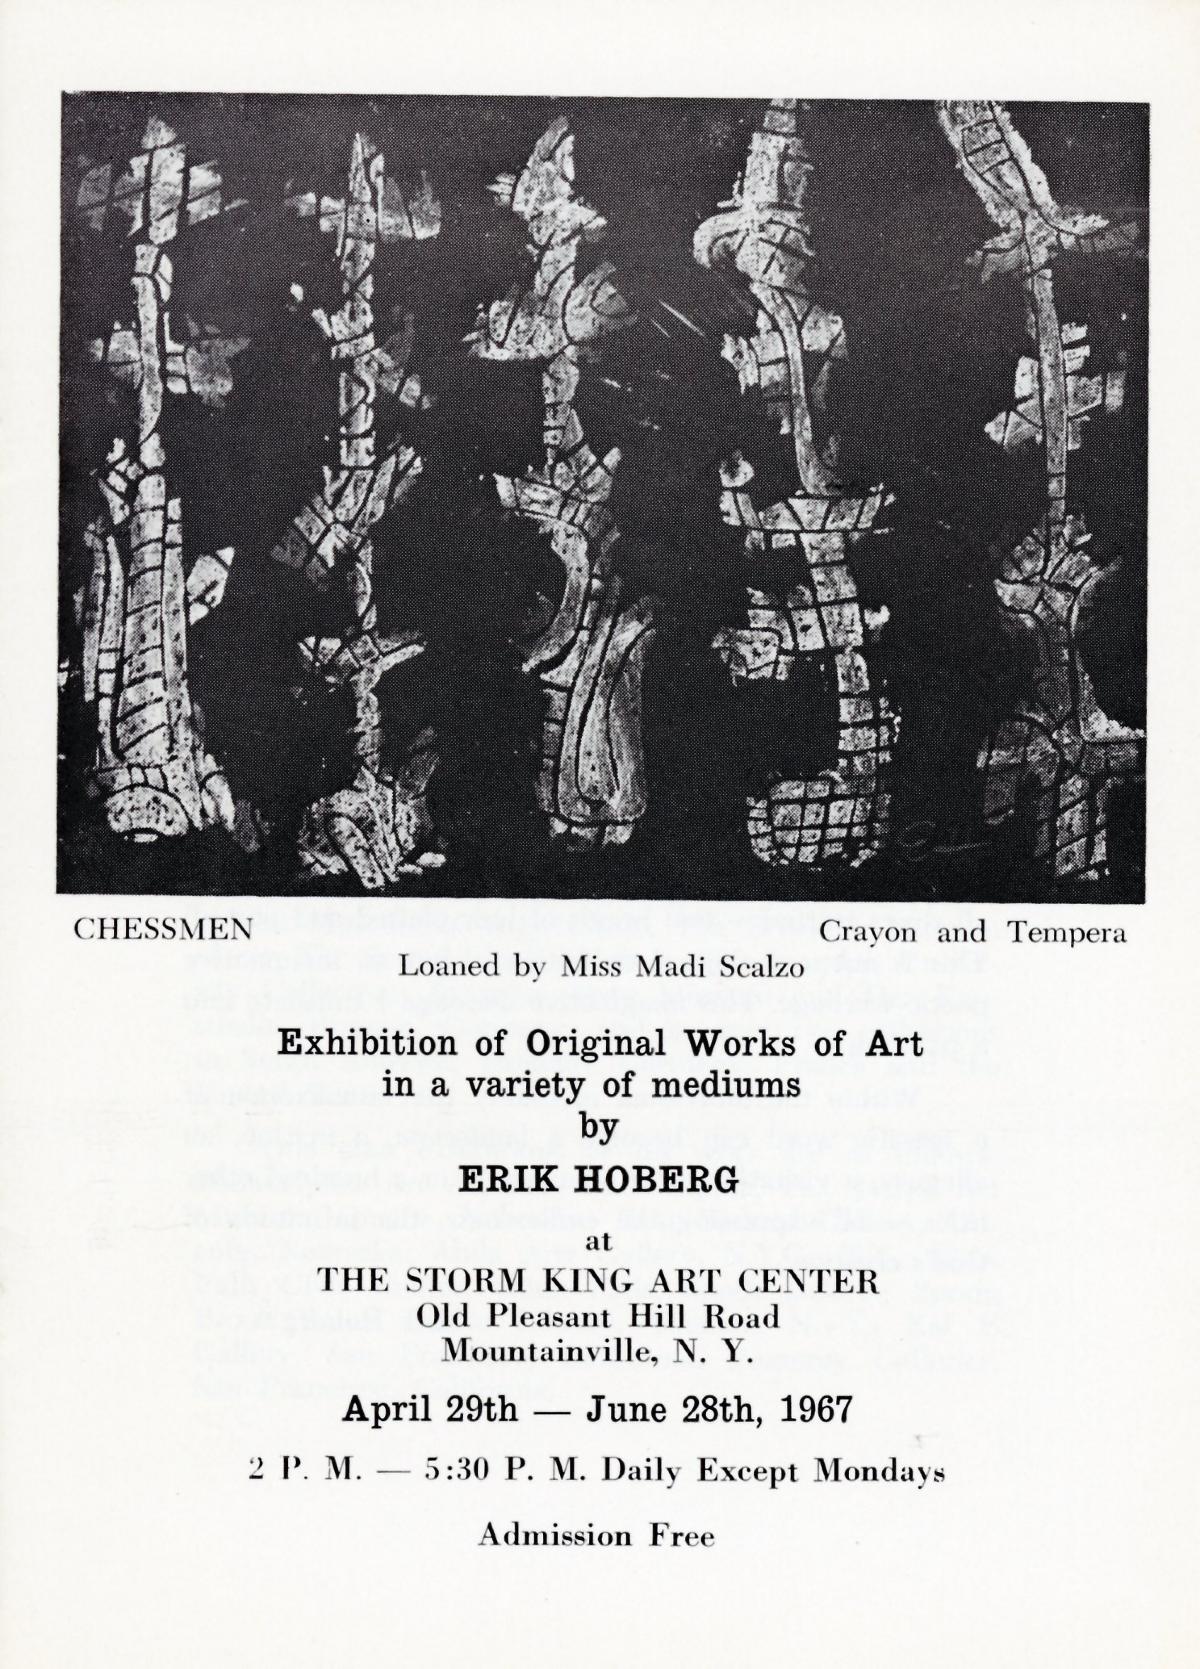 Exhibition of Original Works of Art in a variety of mediums by Erik Hoberg, April 29-June 28, 1967, brochure cover